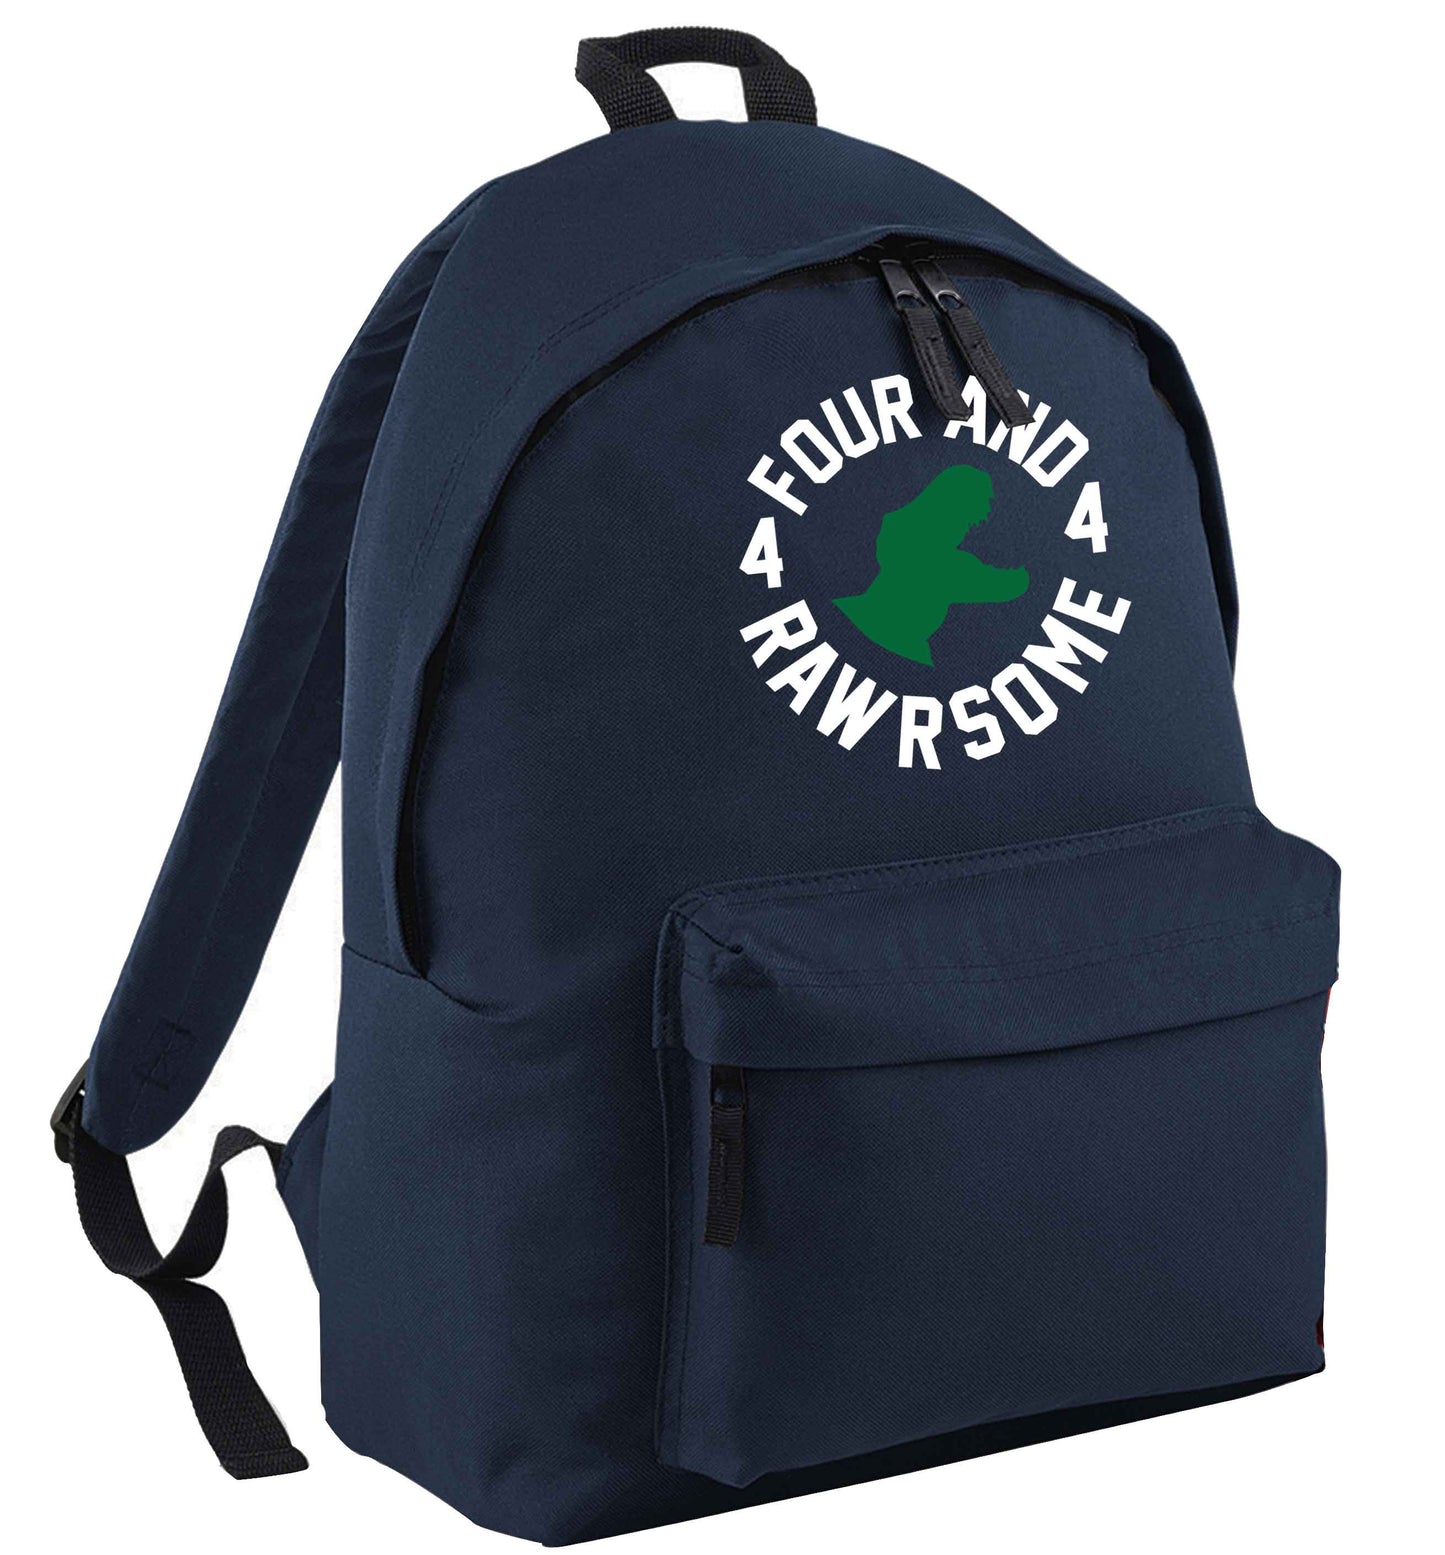 Four and rawrsome navy childrens backpack